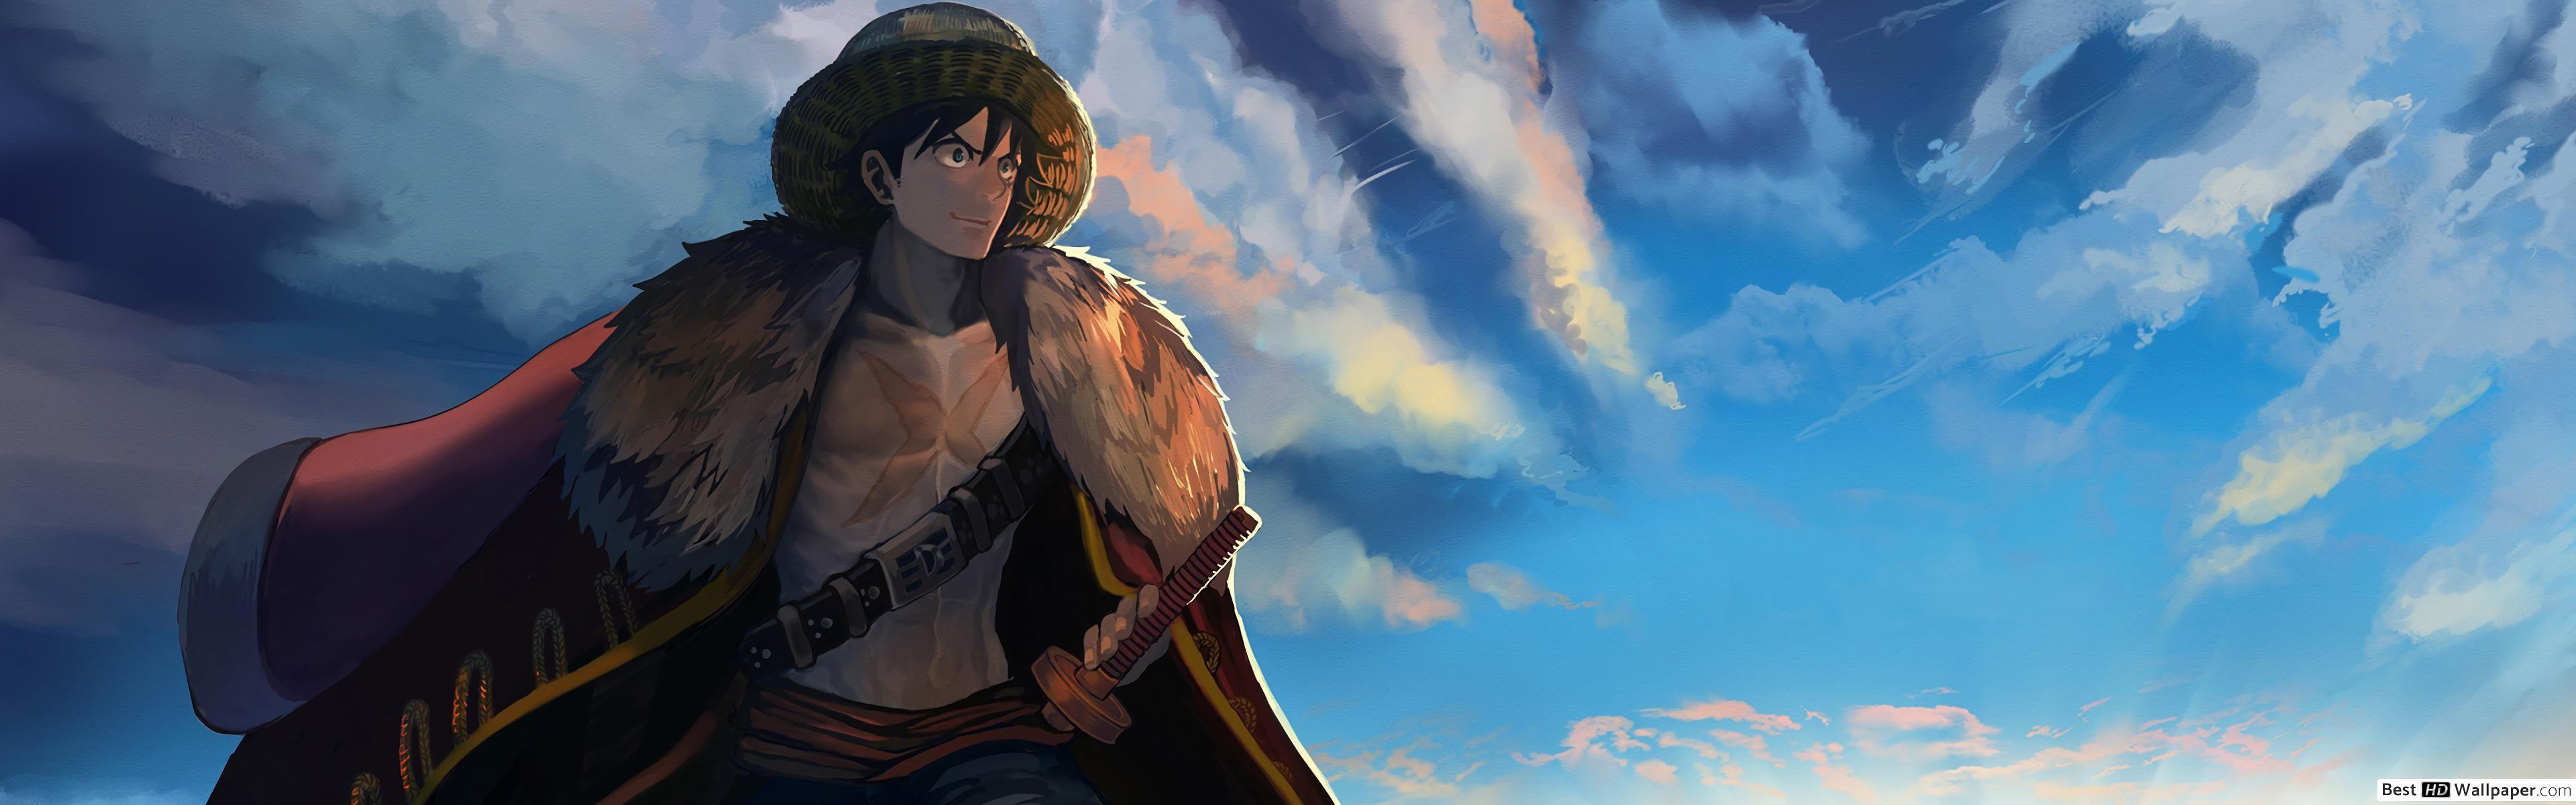 One Piece Wallpaper 3840x1080 - Wallpaper Images Android PC HD